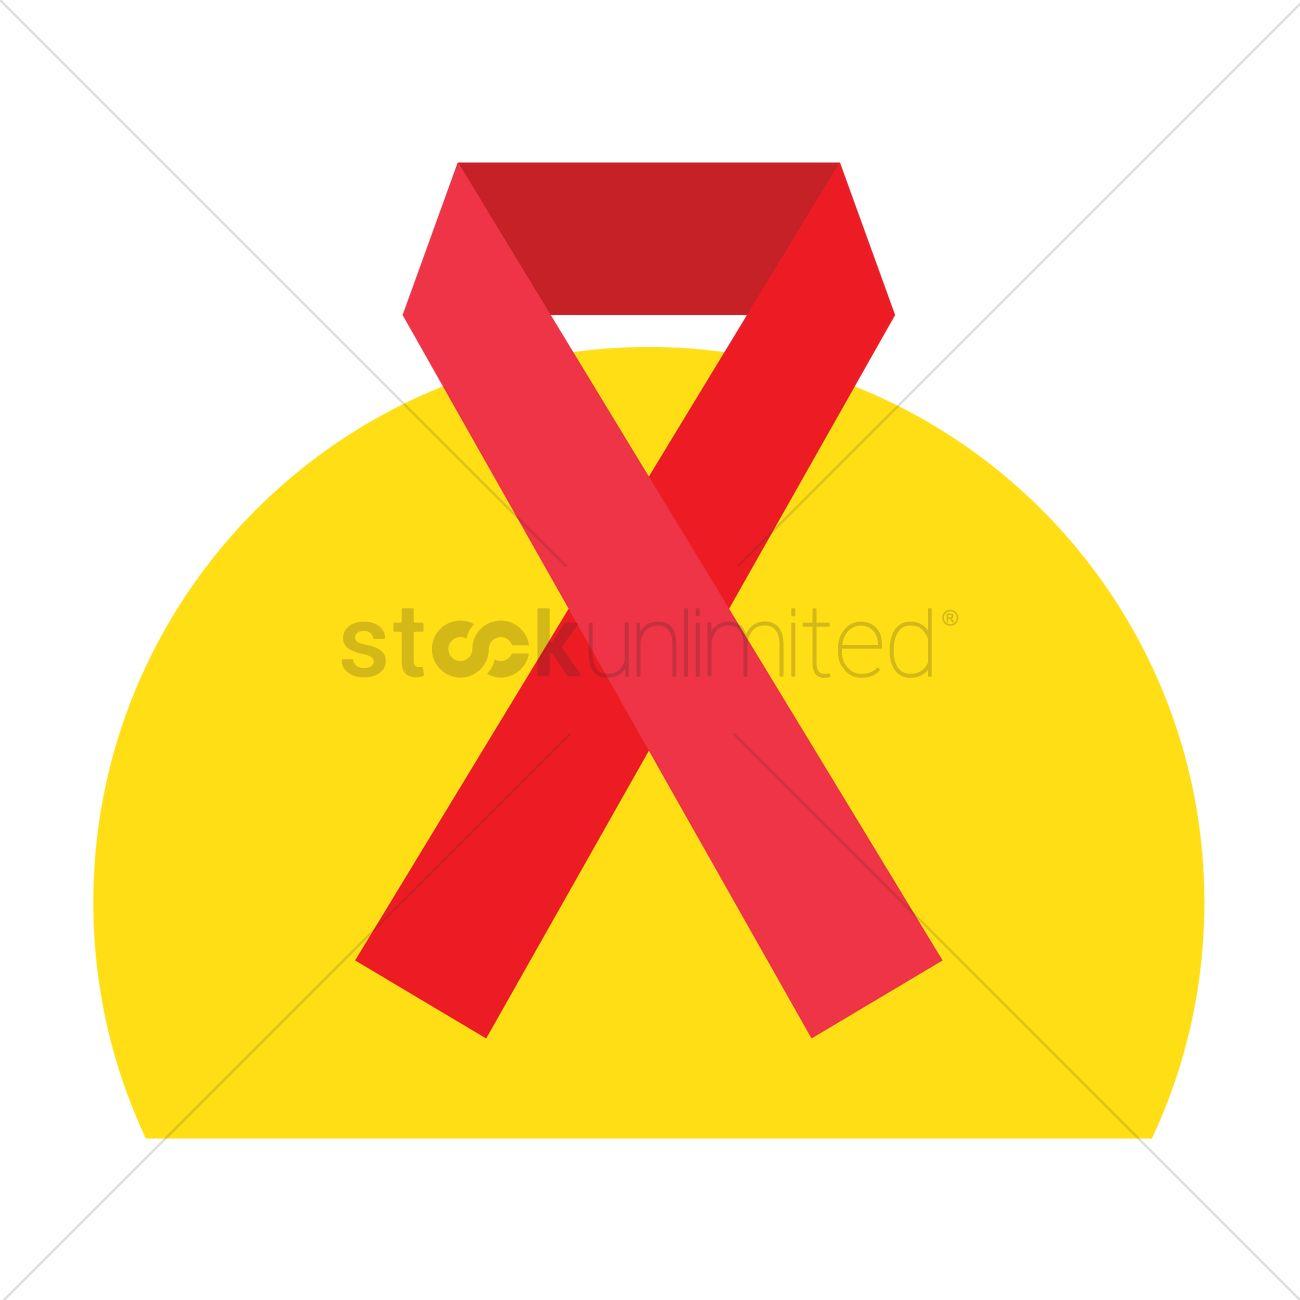 Red Robbon and Yellow Logo - Red ribbon symbol Vector Image - 1256732 | StockUnlimited